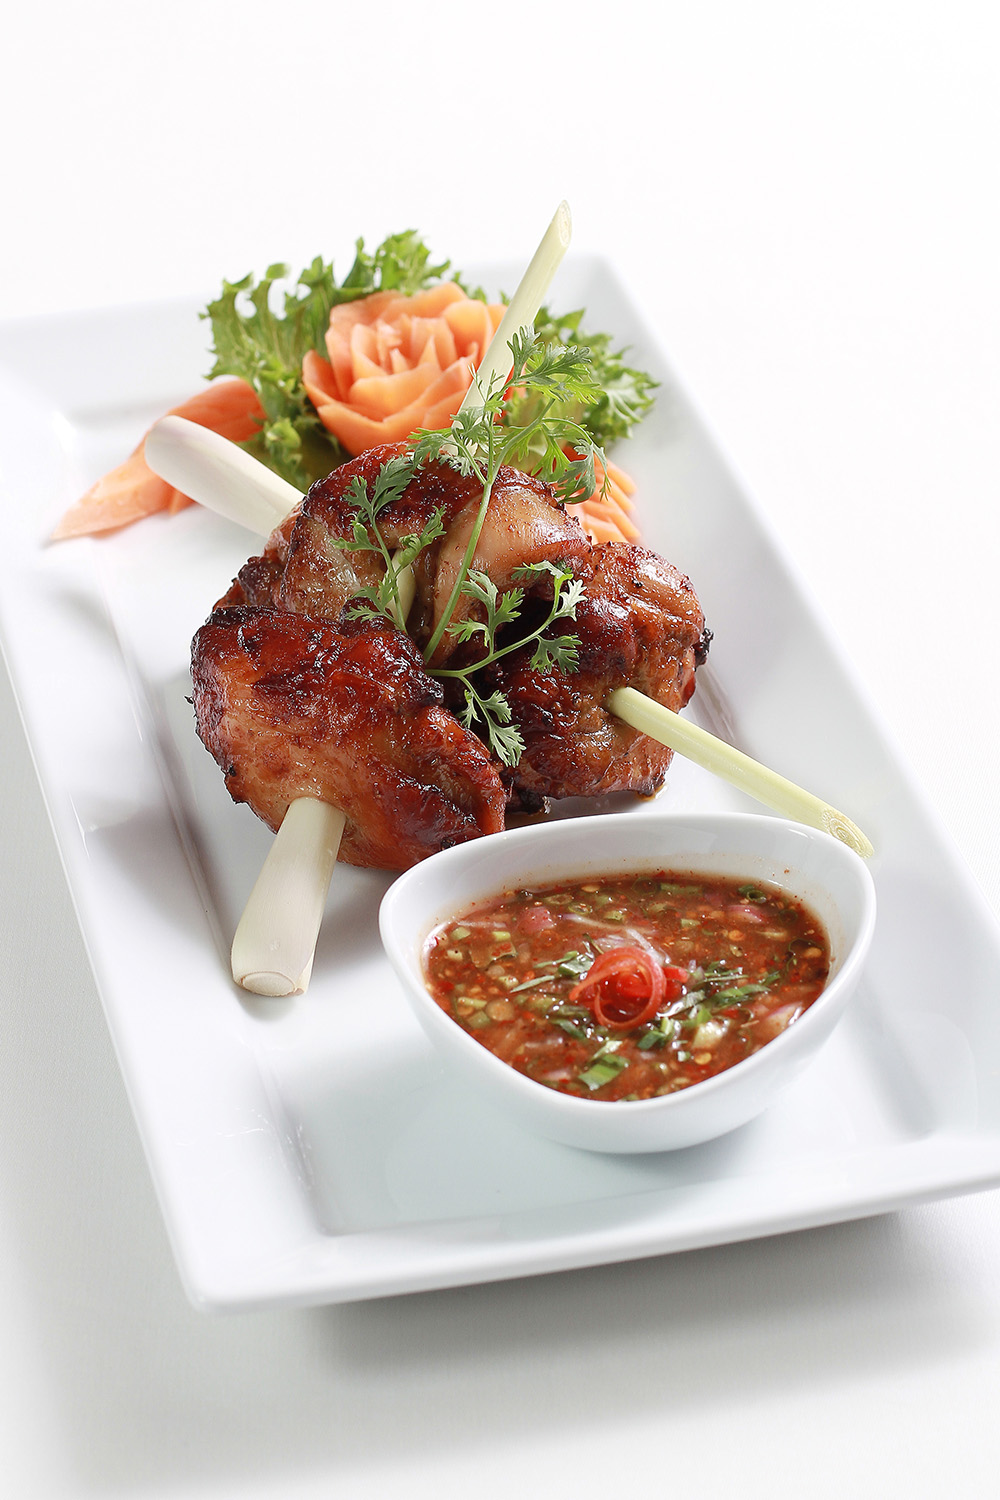 Grilled marinated chicken thigh with crunchy vegetables and spicy e-sarn sauce